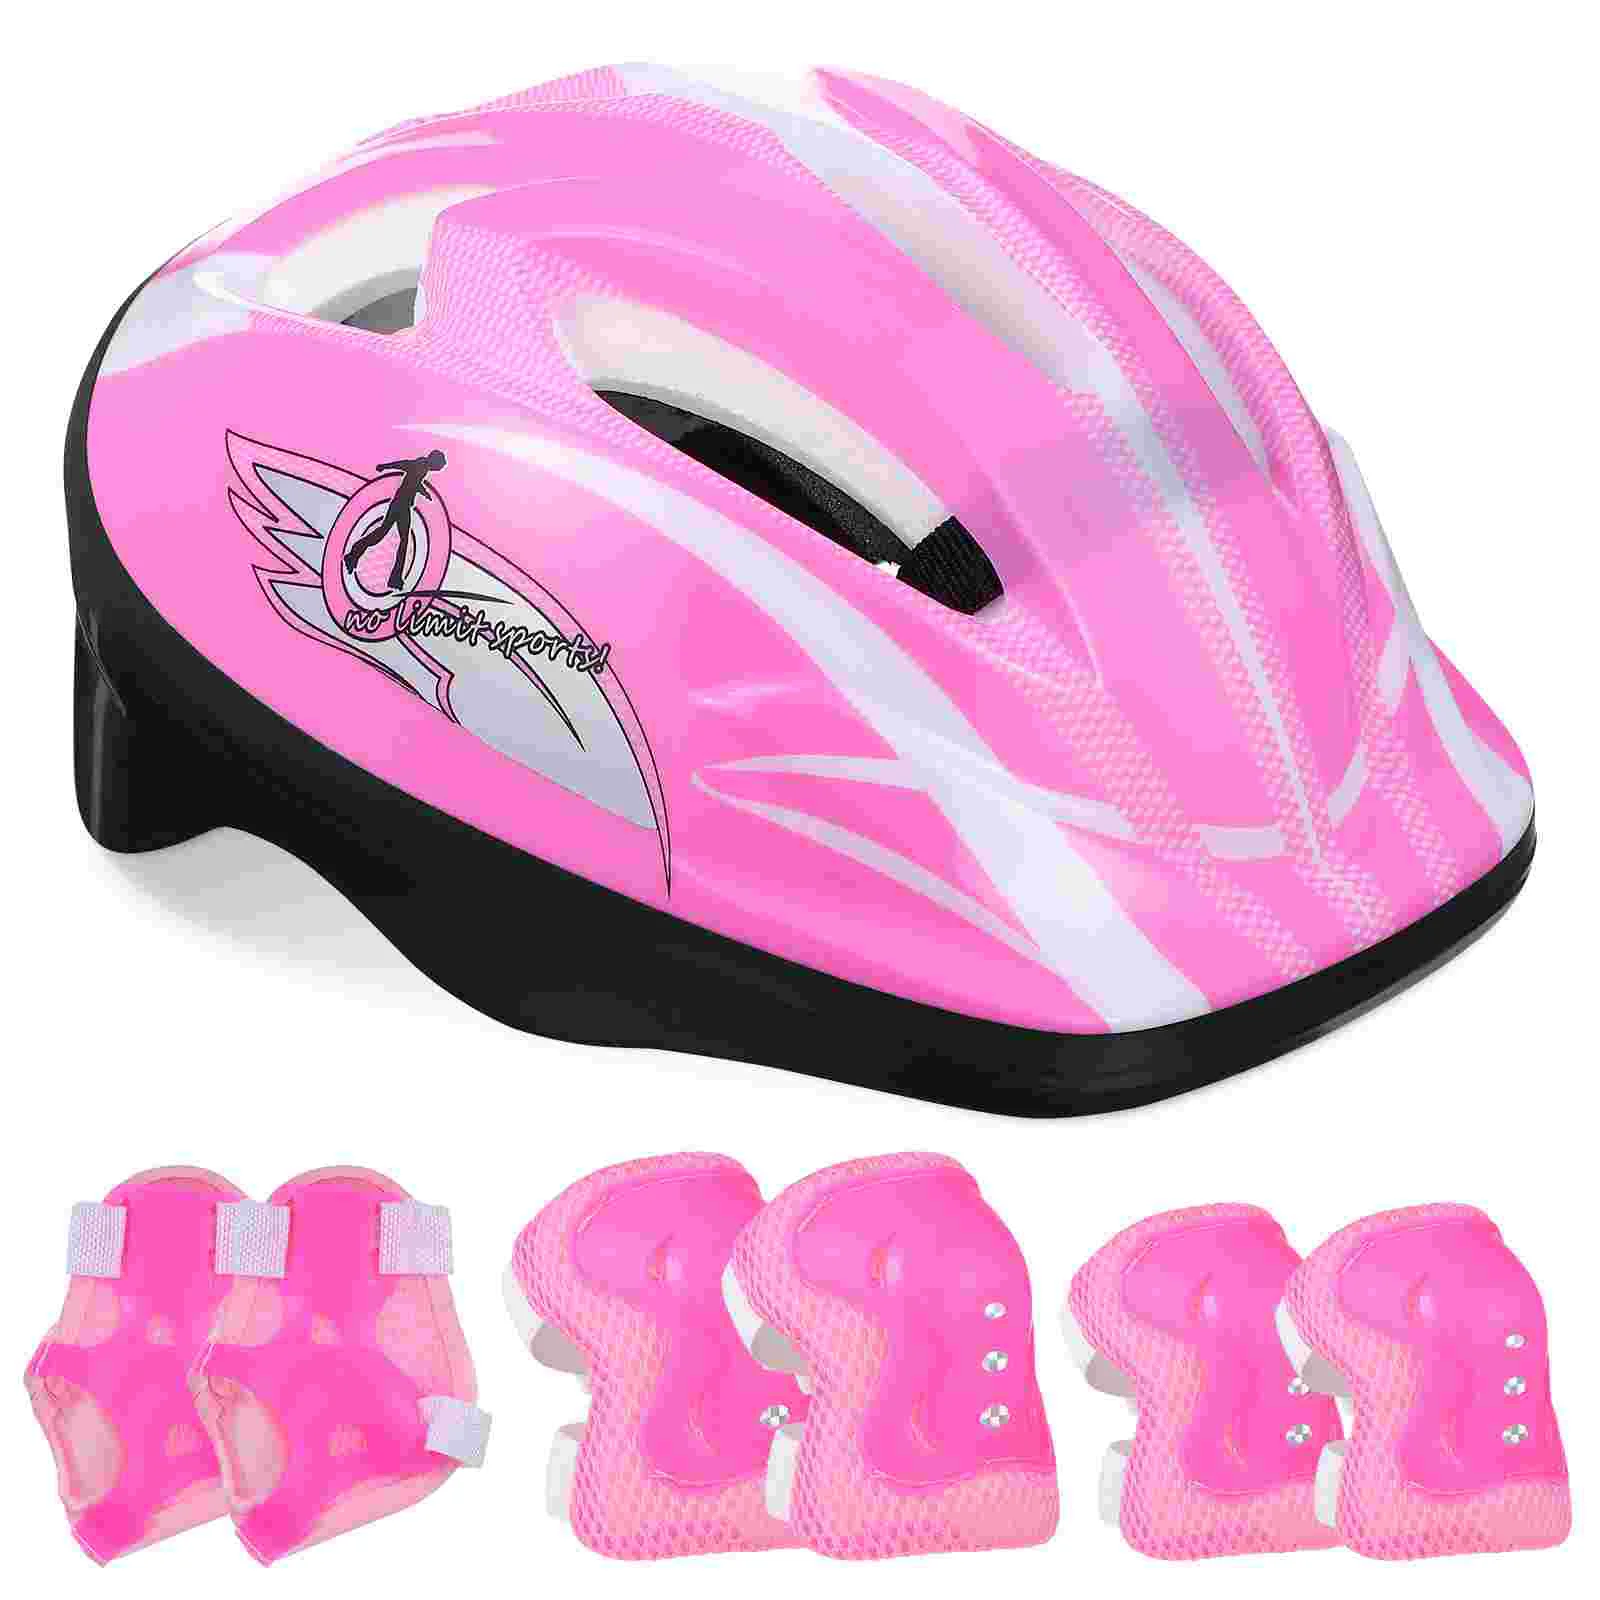 

Kids Bike Helmet Knee Elbow Wrist Pads Toddler Helmet With Protective Gear Set For Bicycle Cycling Skateboard Scooter Skating